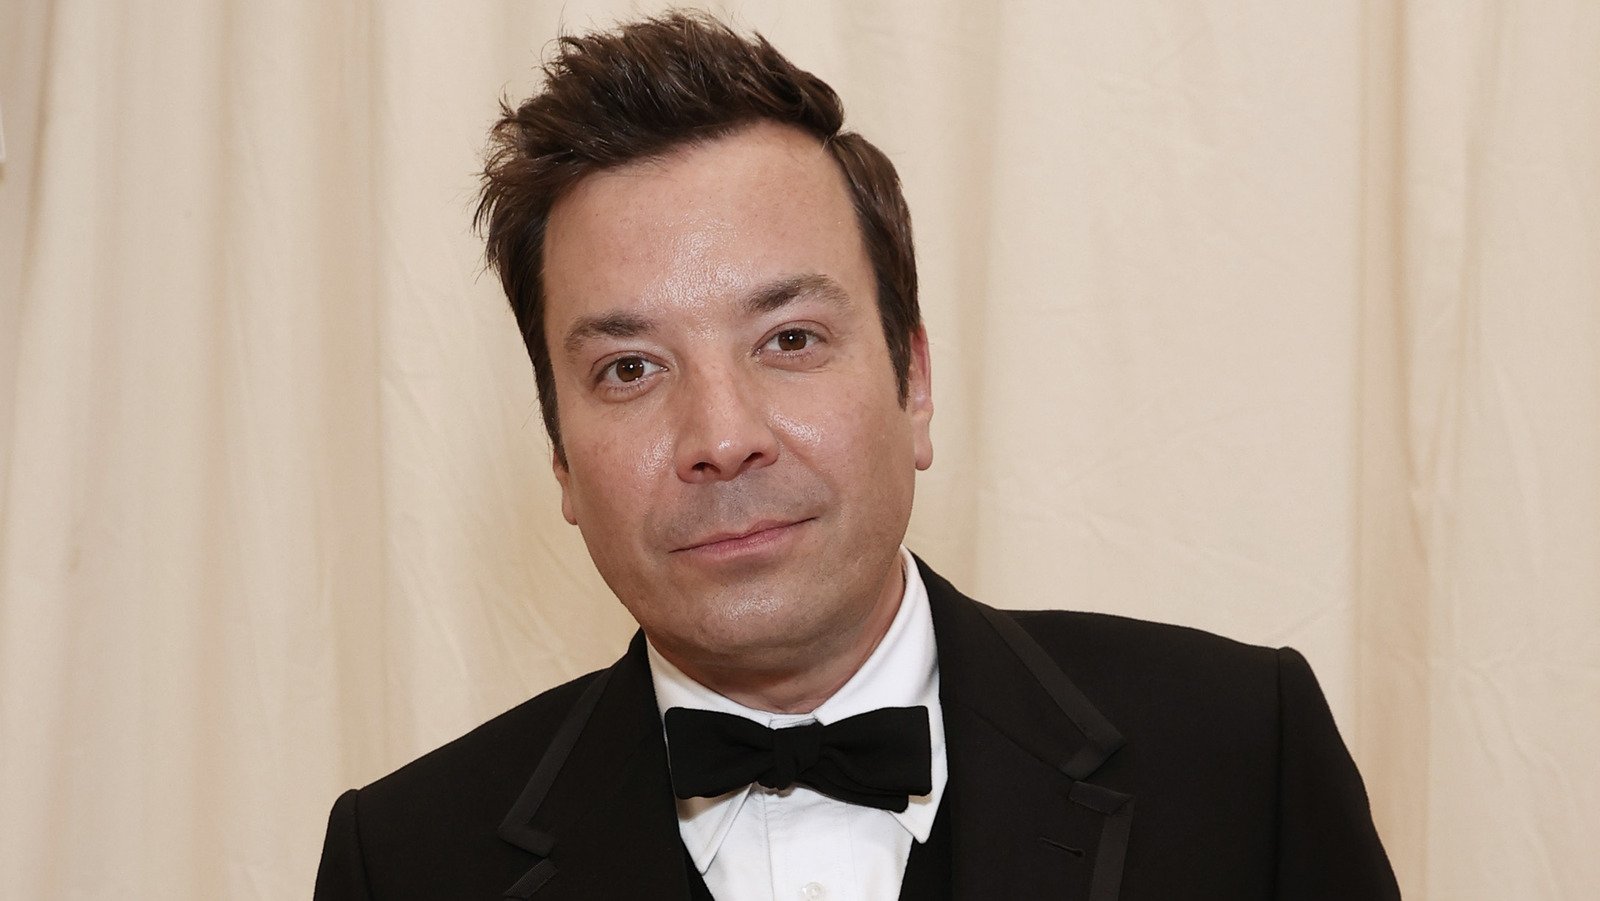 Jimmy Fallon's Toxic Workplace Controversy Has Twitter Roasting His Downfall